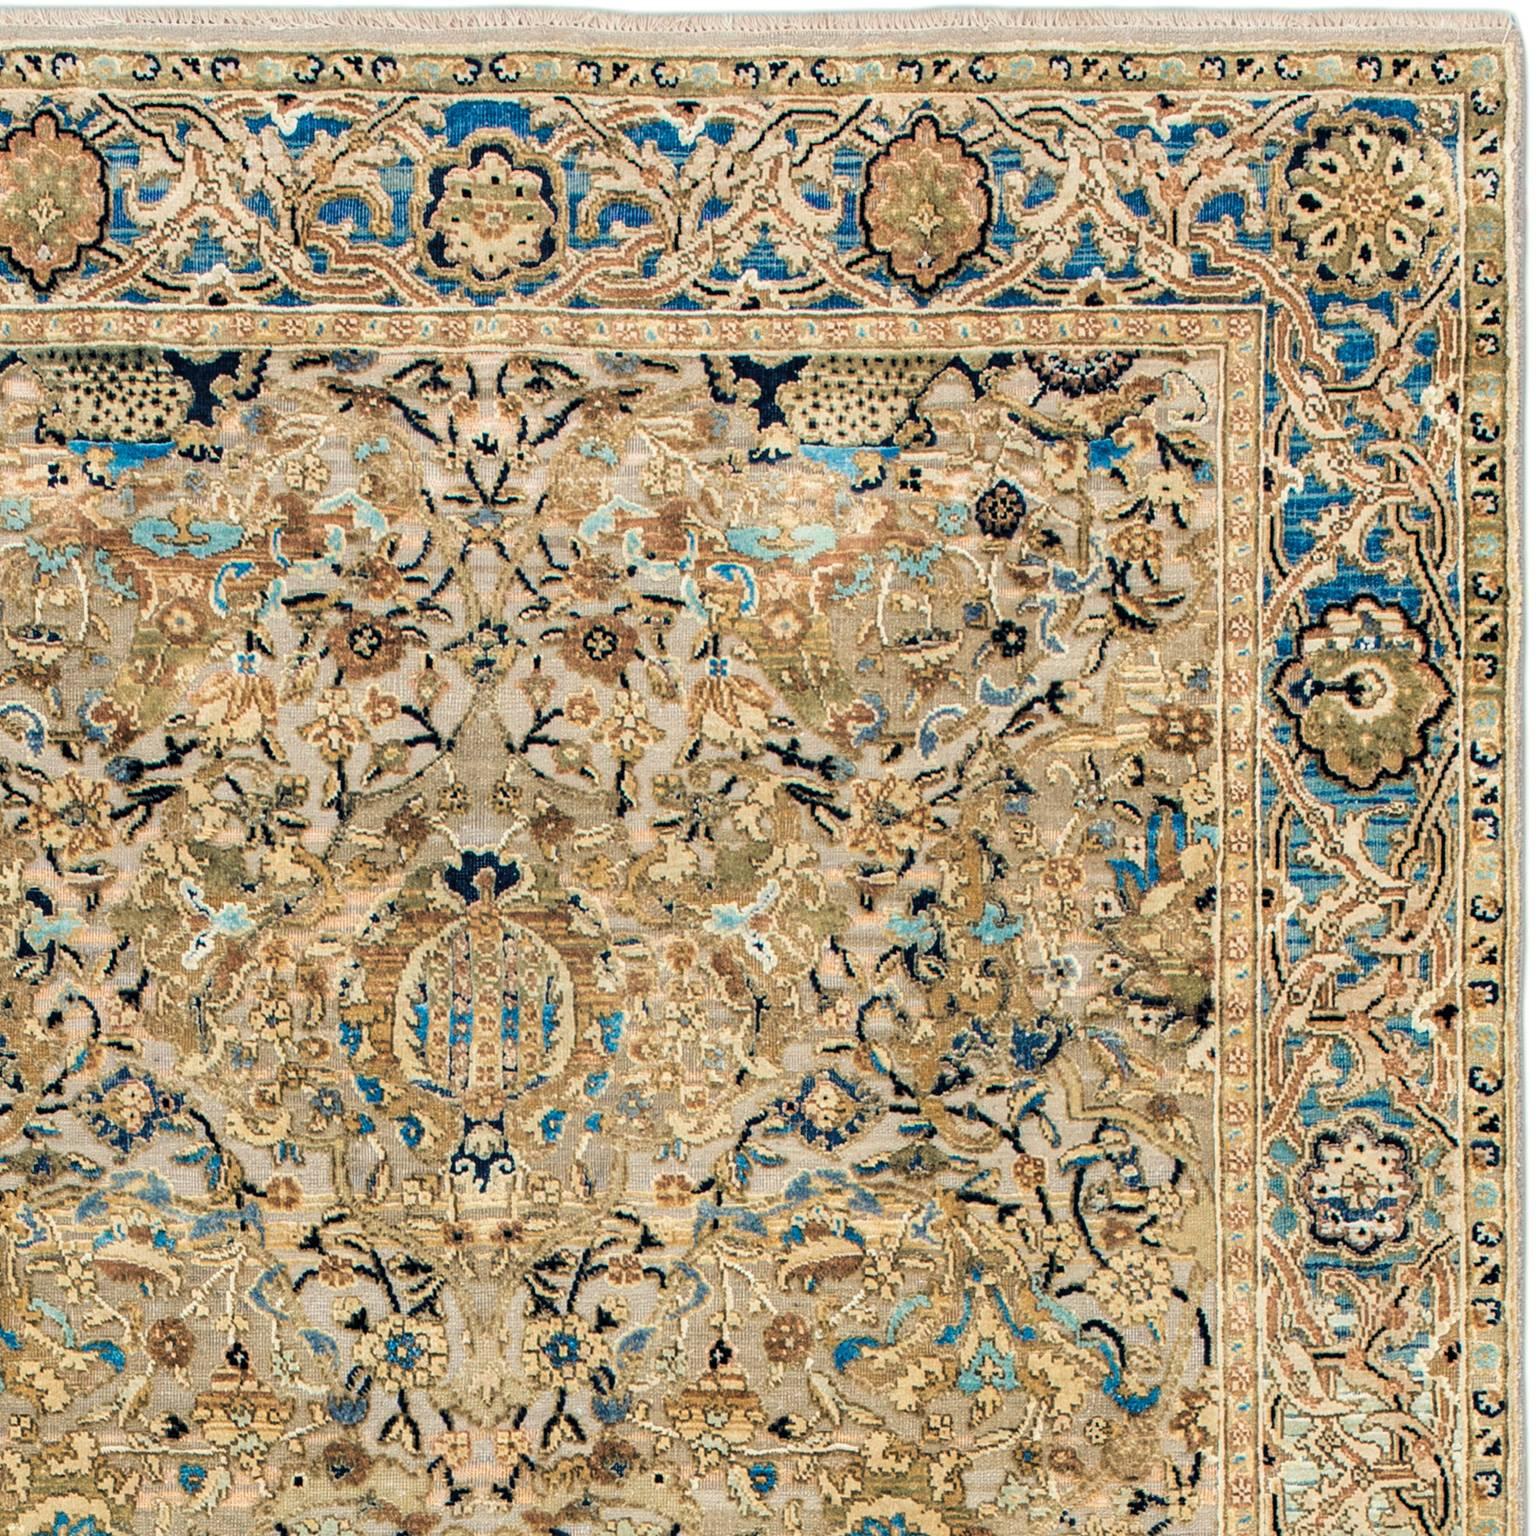 Knots rugs presents the new 17th century Classic Polonaise No. 01. This rug is produced in Jaipur in a 11/11 Persian hand-knotted quality, materials used, oxidized wool and silk. This limited Edition rug is based on a beautiful Polonaise rug from